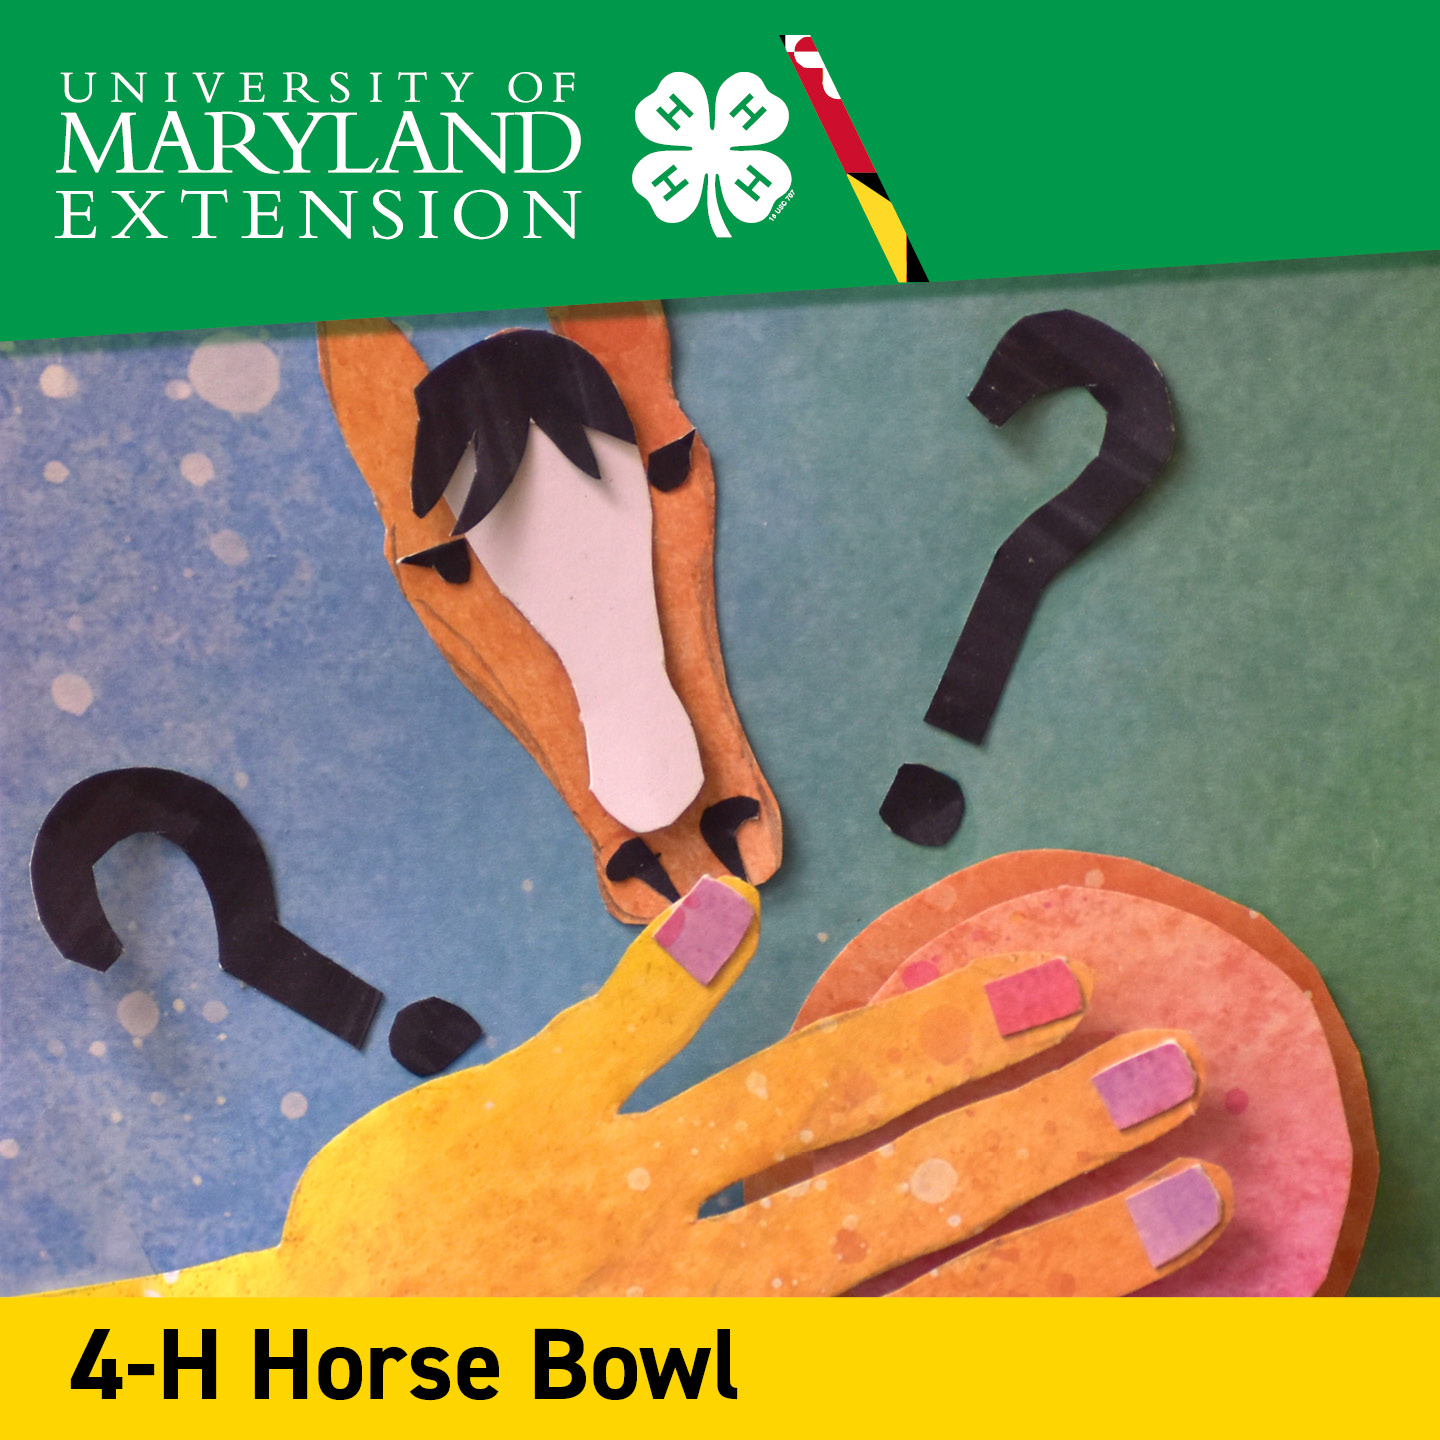 Student drawing of a horse with buzzer buttons for Horse Bowl